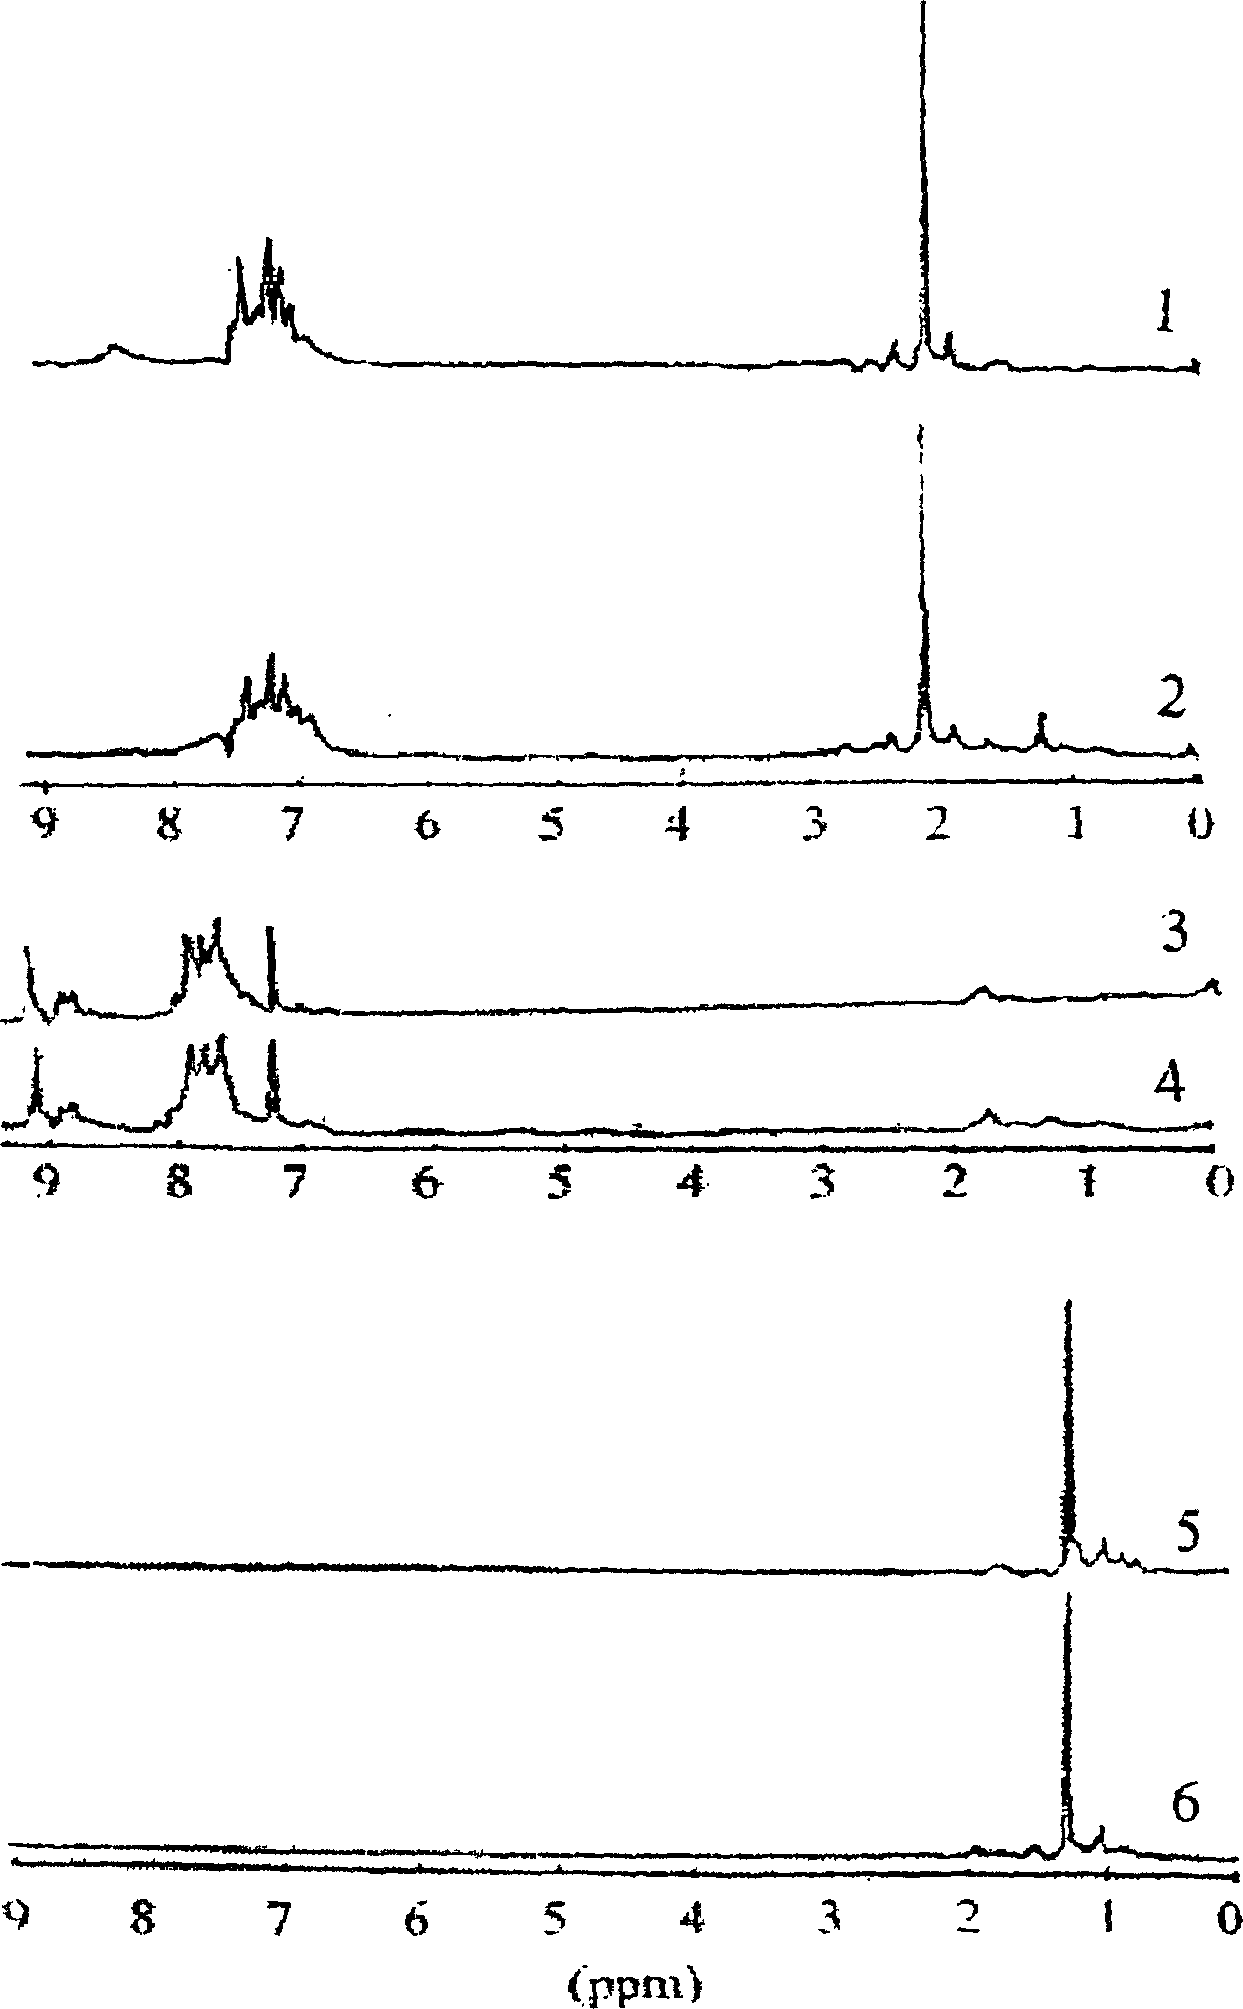 Group composition analysis method for hydrocarbon series of residual oil and bitumen